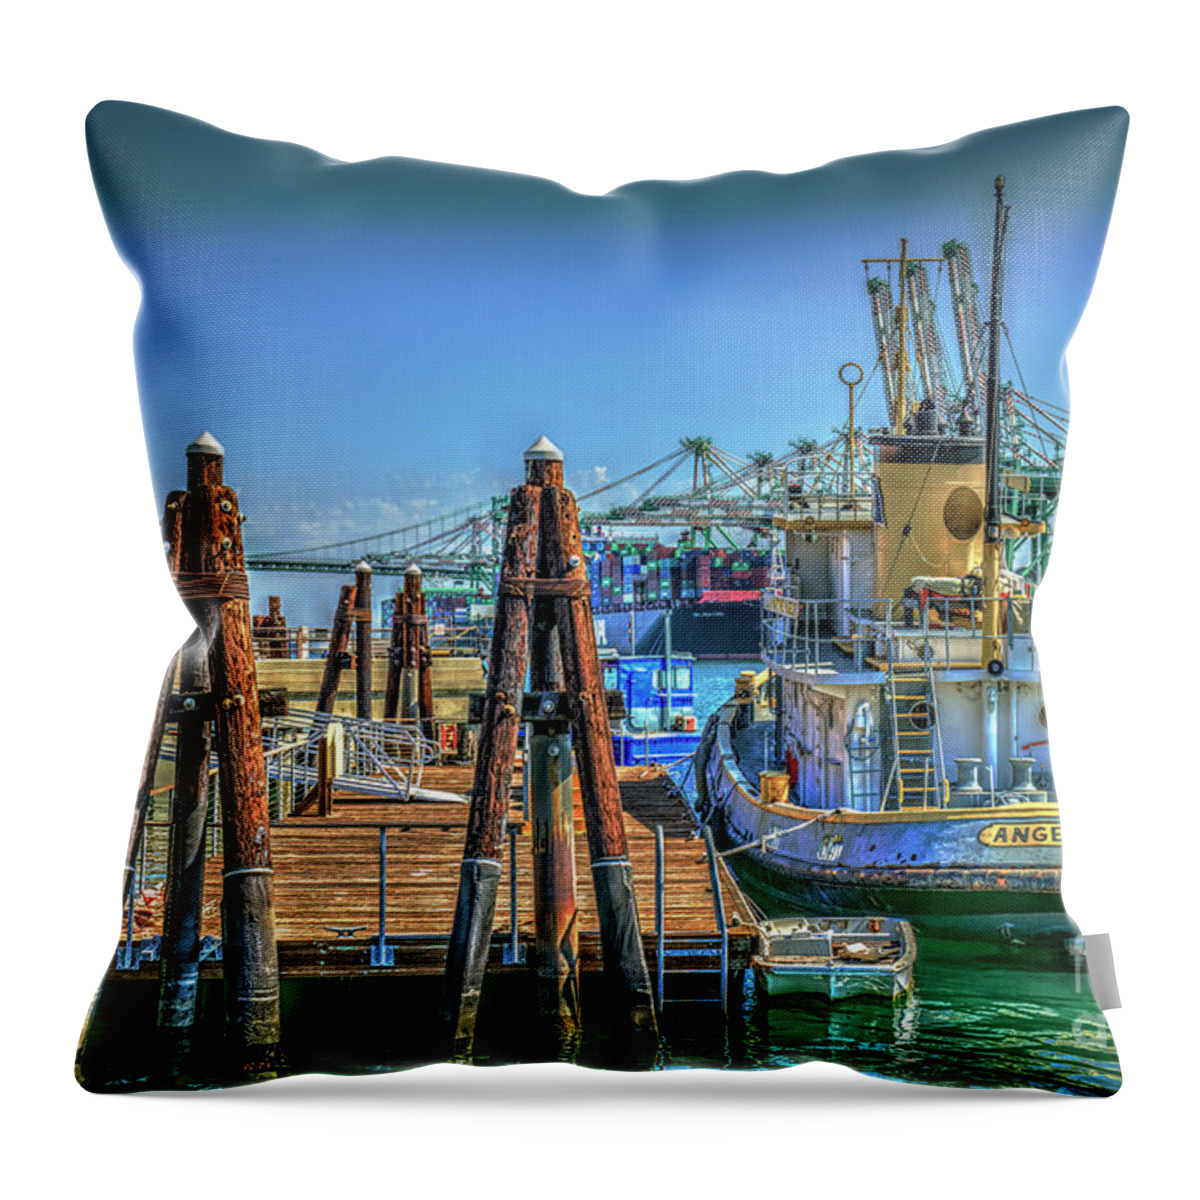 Tug Boats Throw Pillow featuring the photograph San Pedro Busy Port by David Zanzinger